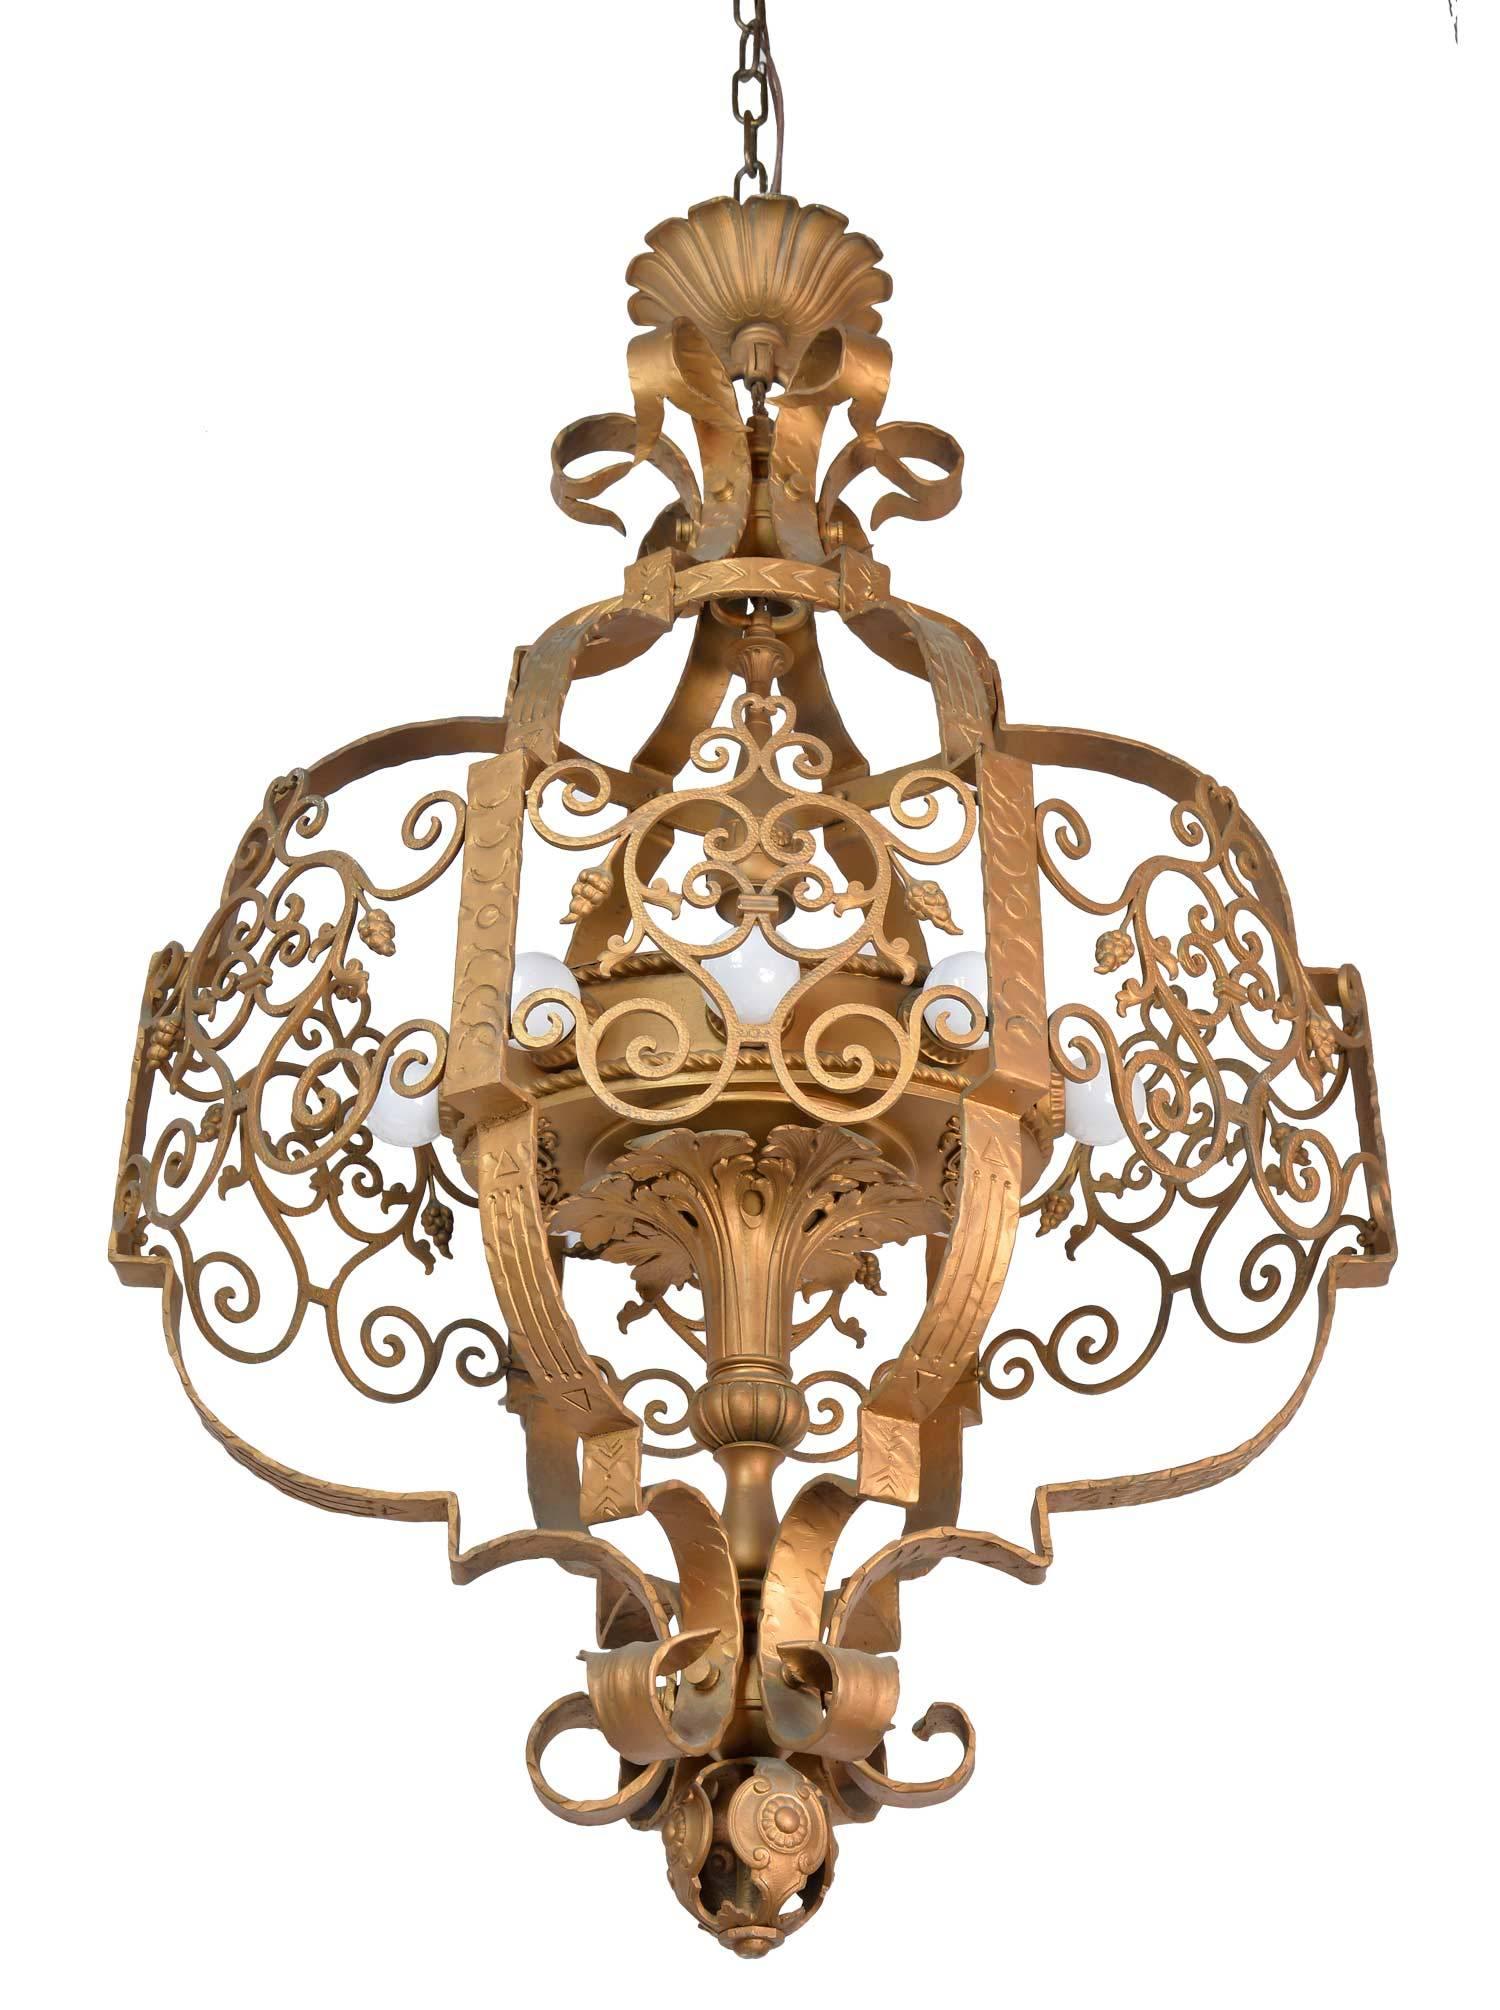 A large theatre light made of iron, ornamentation covers nearly every inch of this breathtaking fixture. Decorative scrolls surround an eight-light cluster body with medallions, acanthus leaf, and grape details. 

We find that early antique lighting